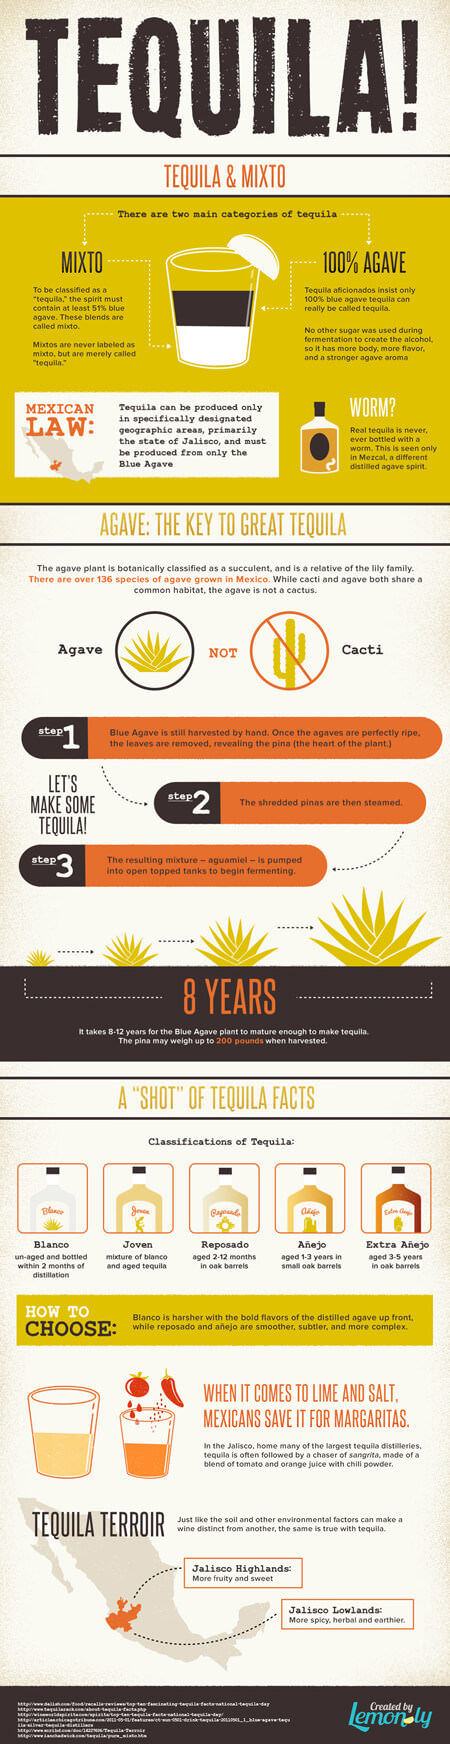 Tequila Facts For Cinco De Mayo